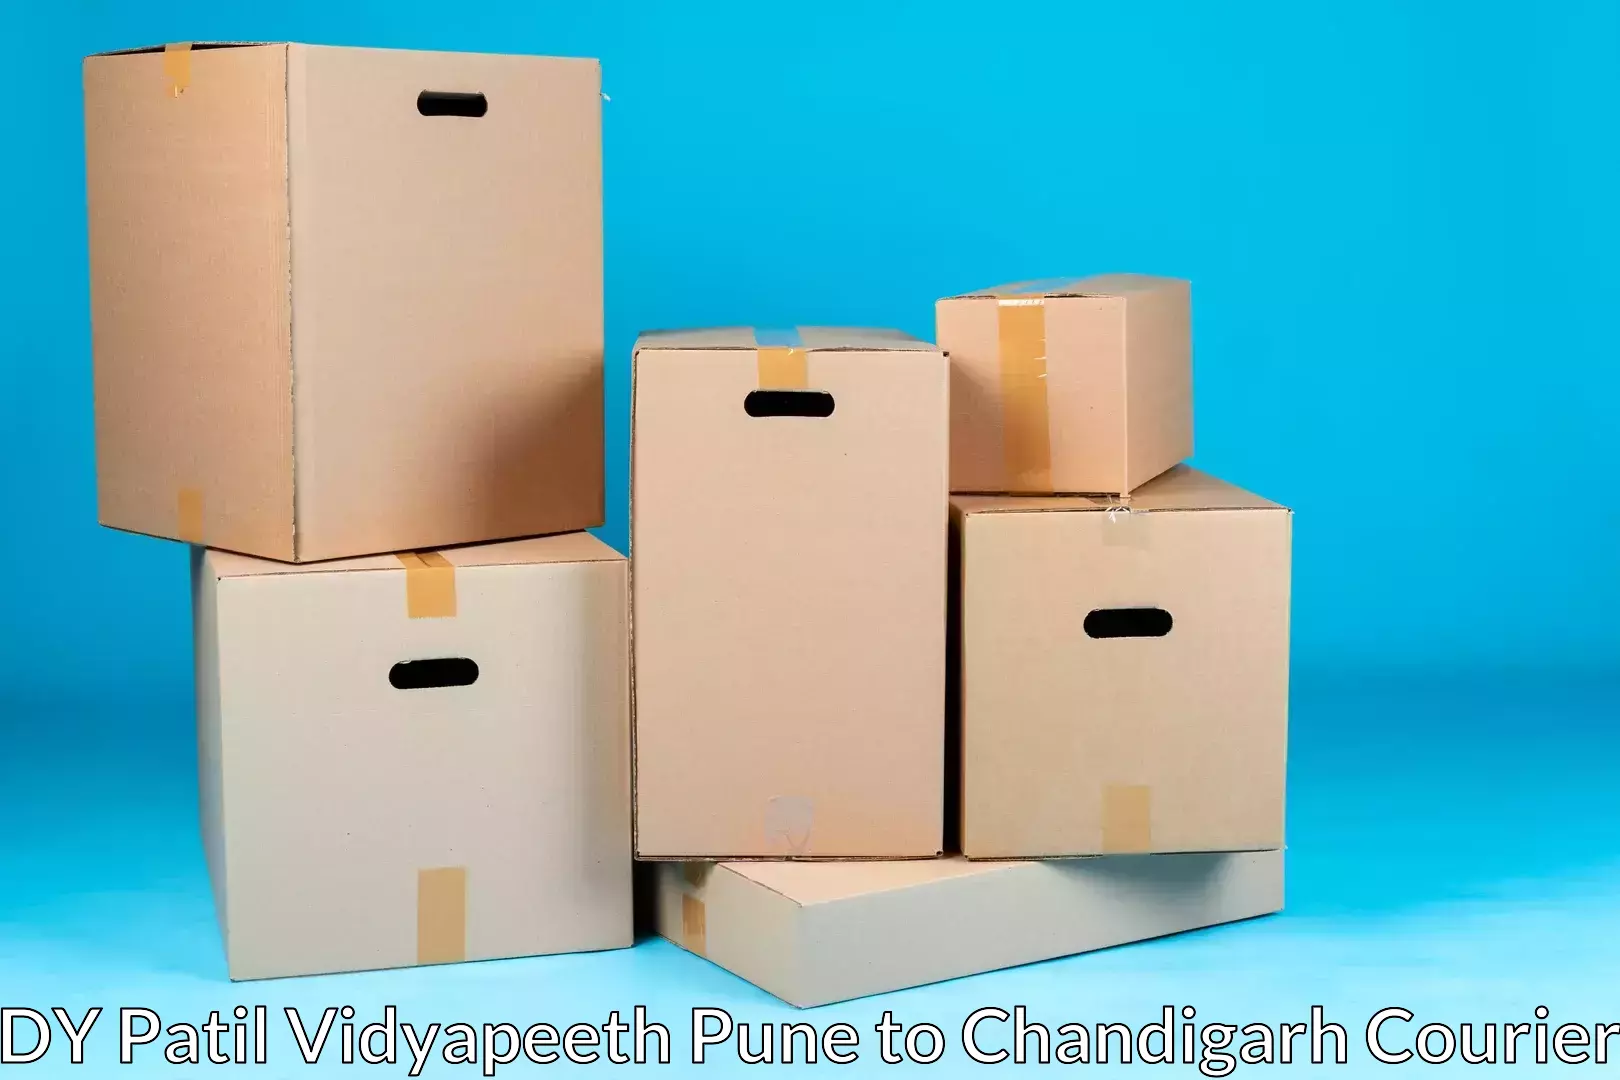 Home shifting services DY Patil Vidyapeeth Pune to Chandigarh